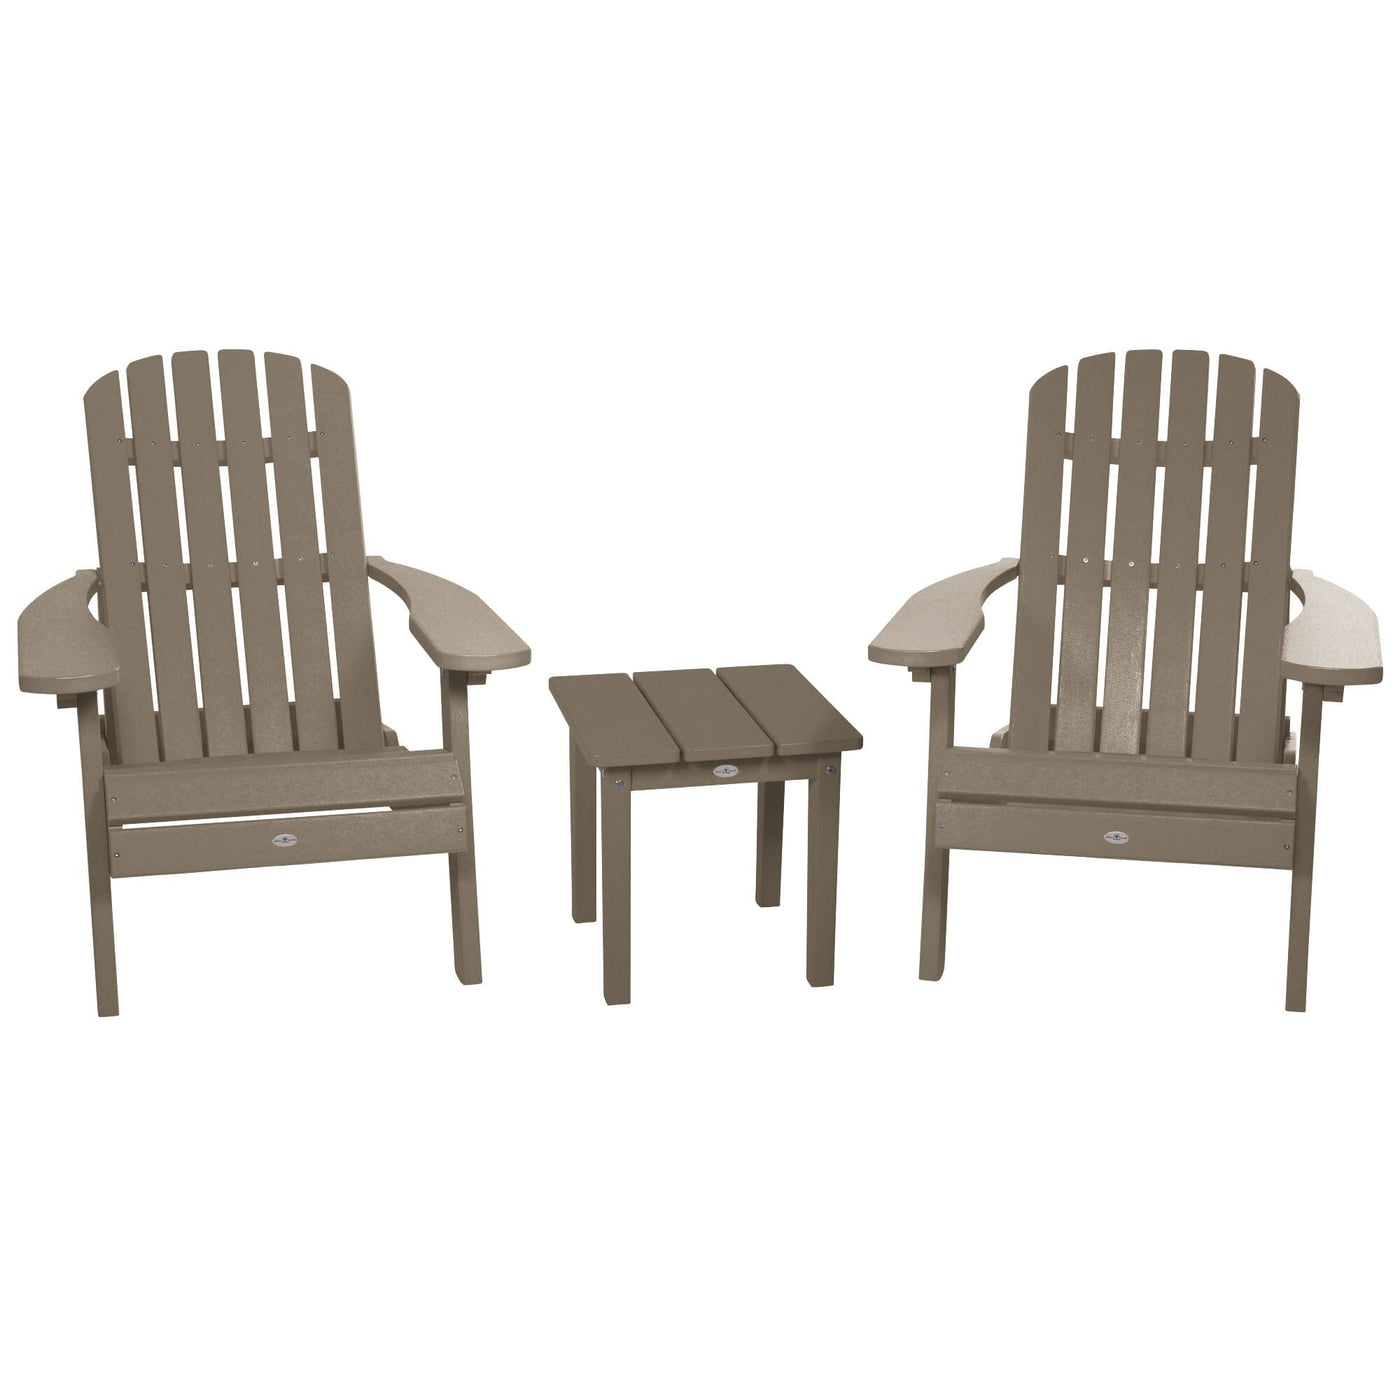 Two Cape Folding Adirondack Chairs and Side Table Set Kitted Set Bahia Verde Outdoors Cabana Tan 